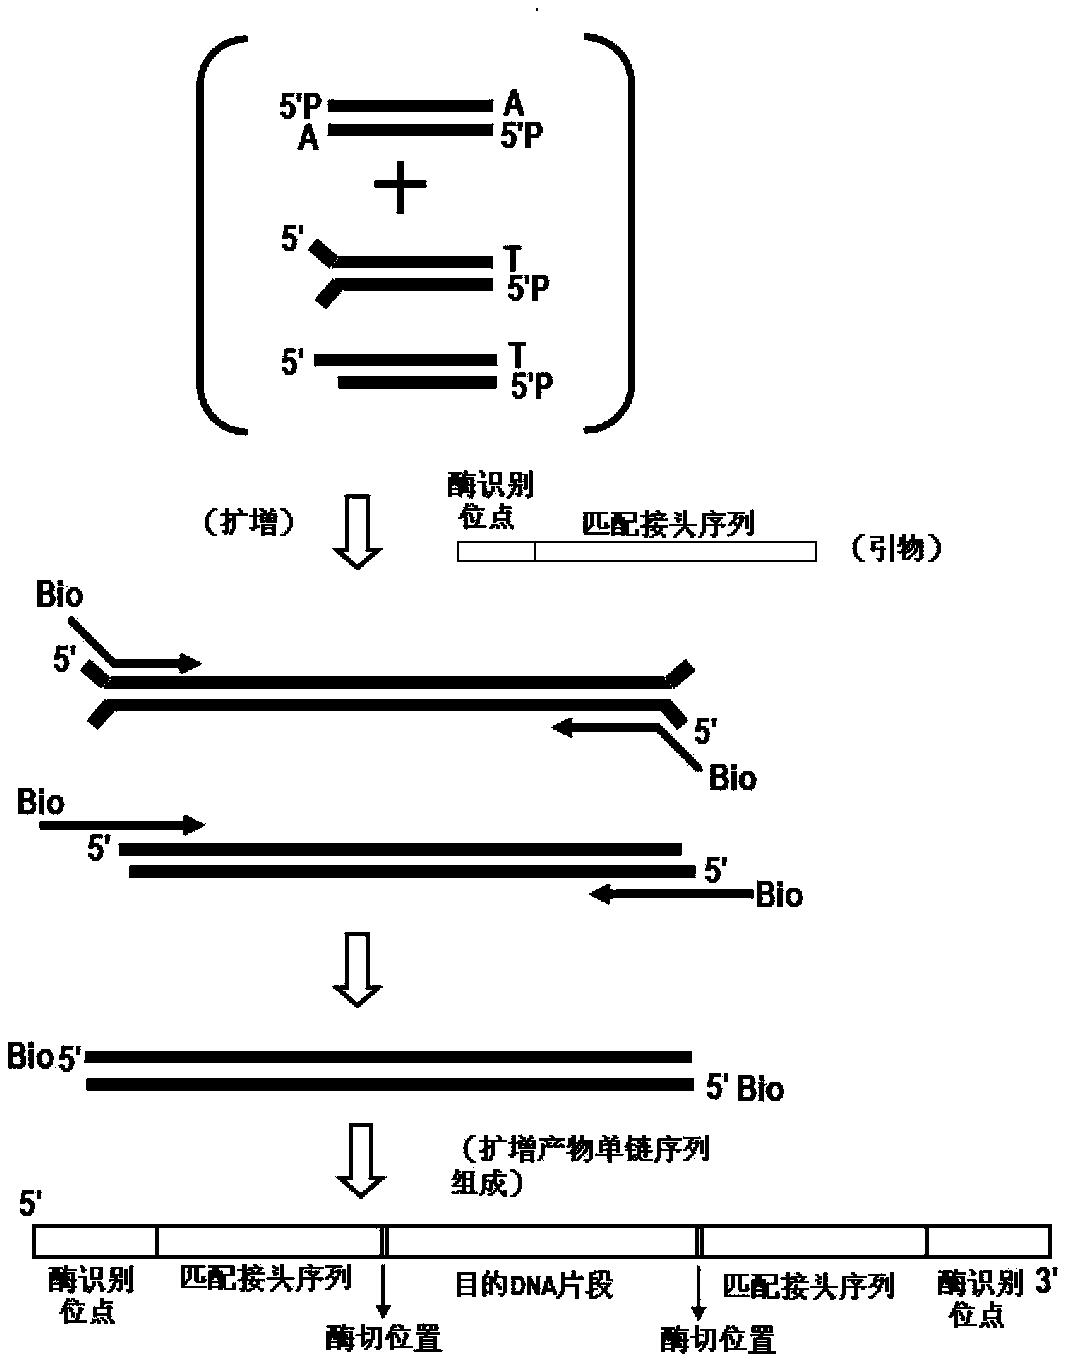 High-throughput sequencing method for methylated DNA and use thereof